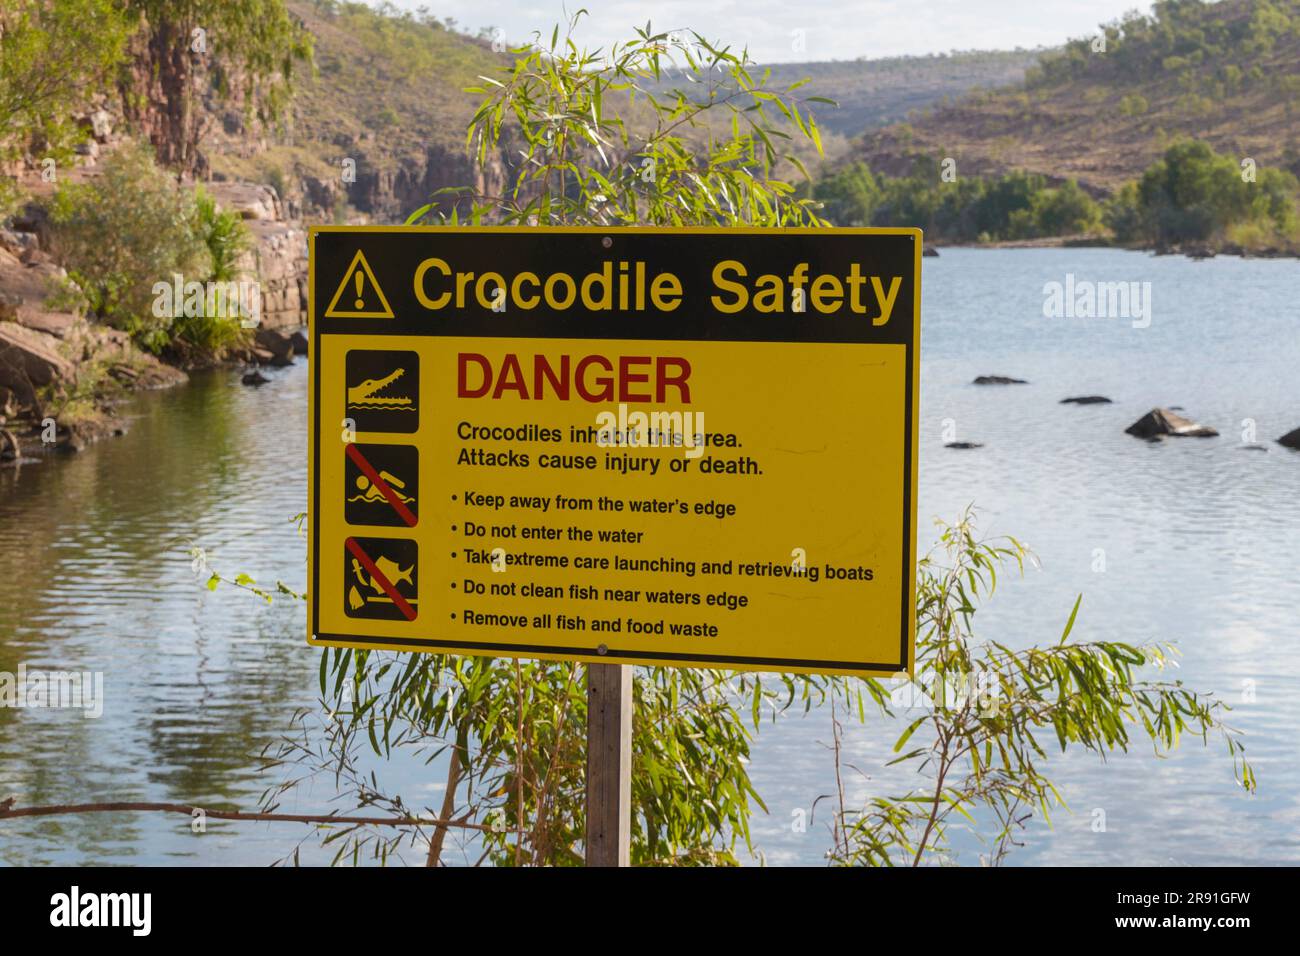 A crocodile safety sign warns people of the danger near the river Chamberlain in Western Australia Stock Photo